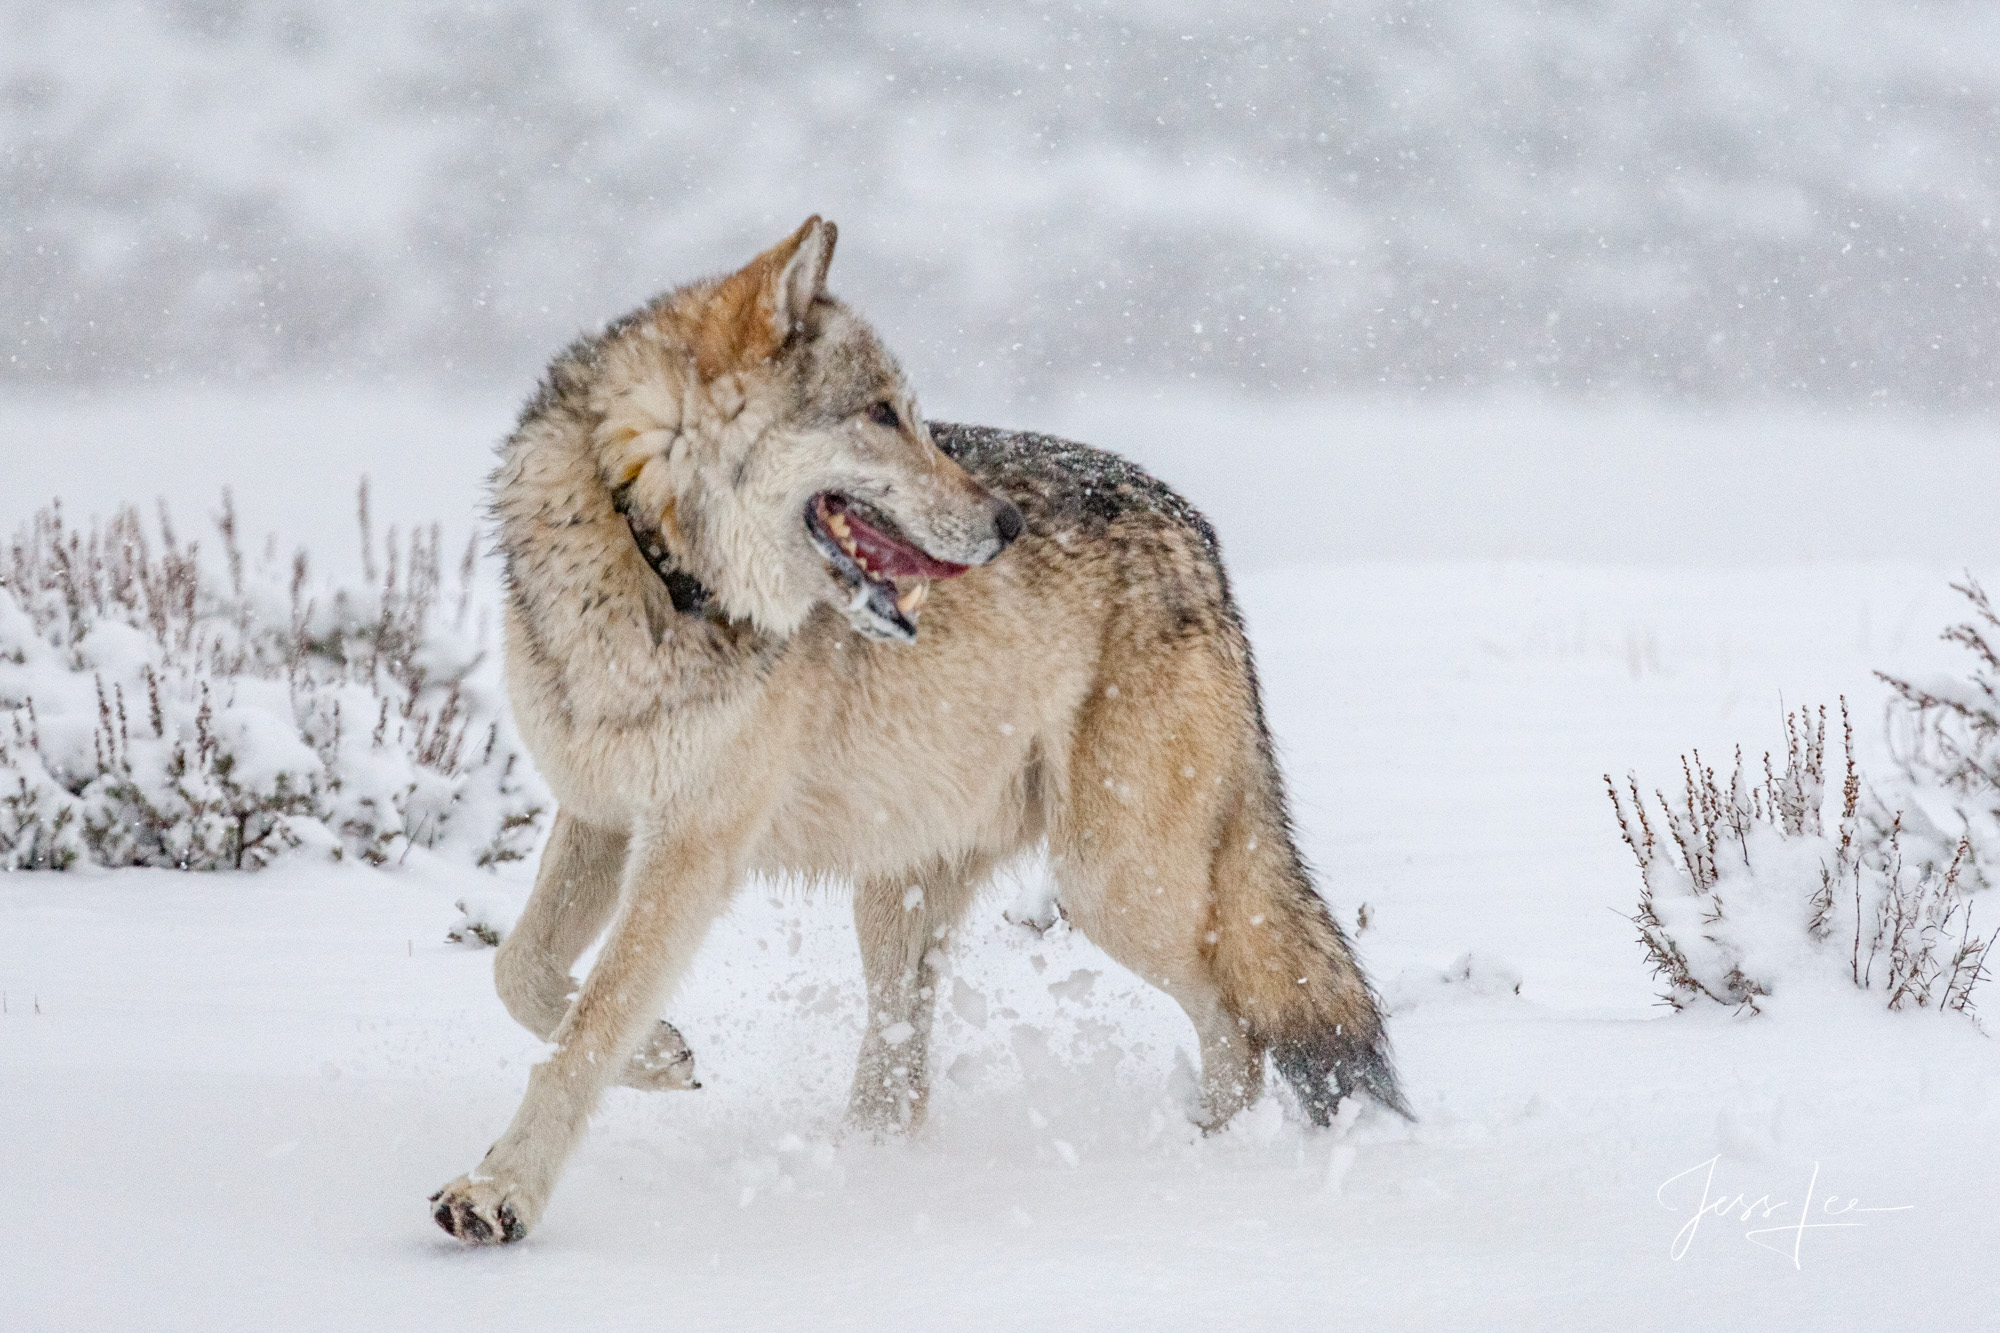 Yellowstone Wolf in the Wild from national geo. Exclusive limited edition photo of 2200 prints by Jess Lee